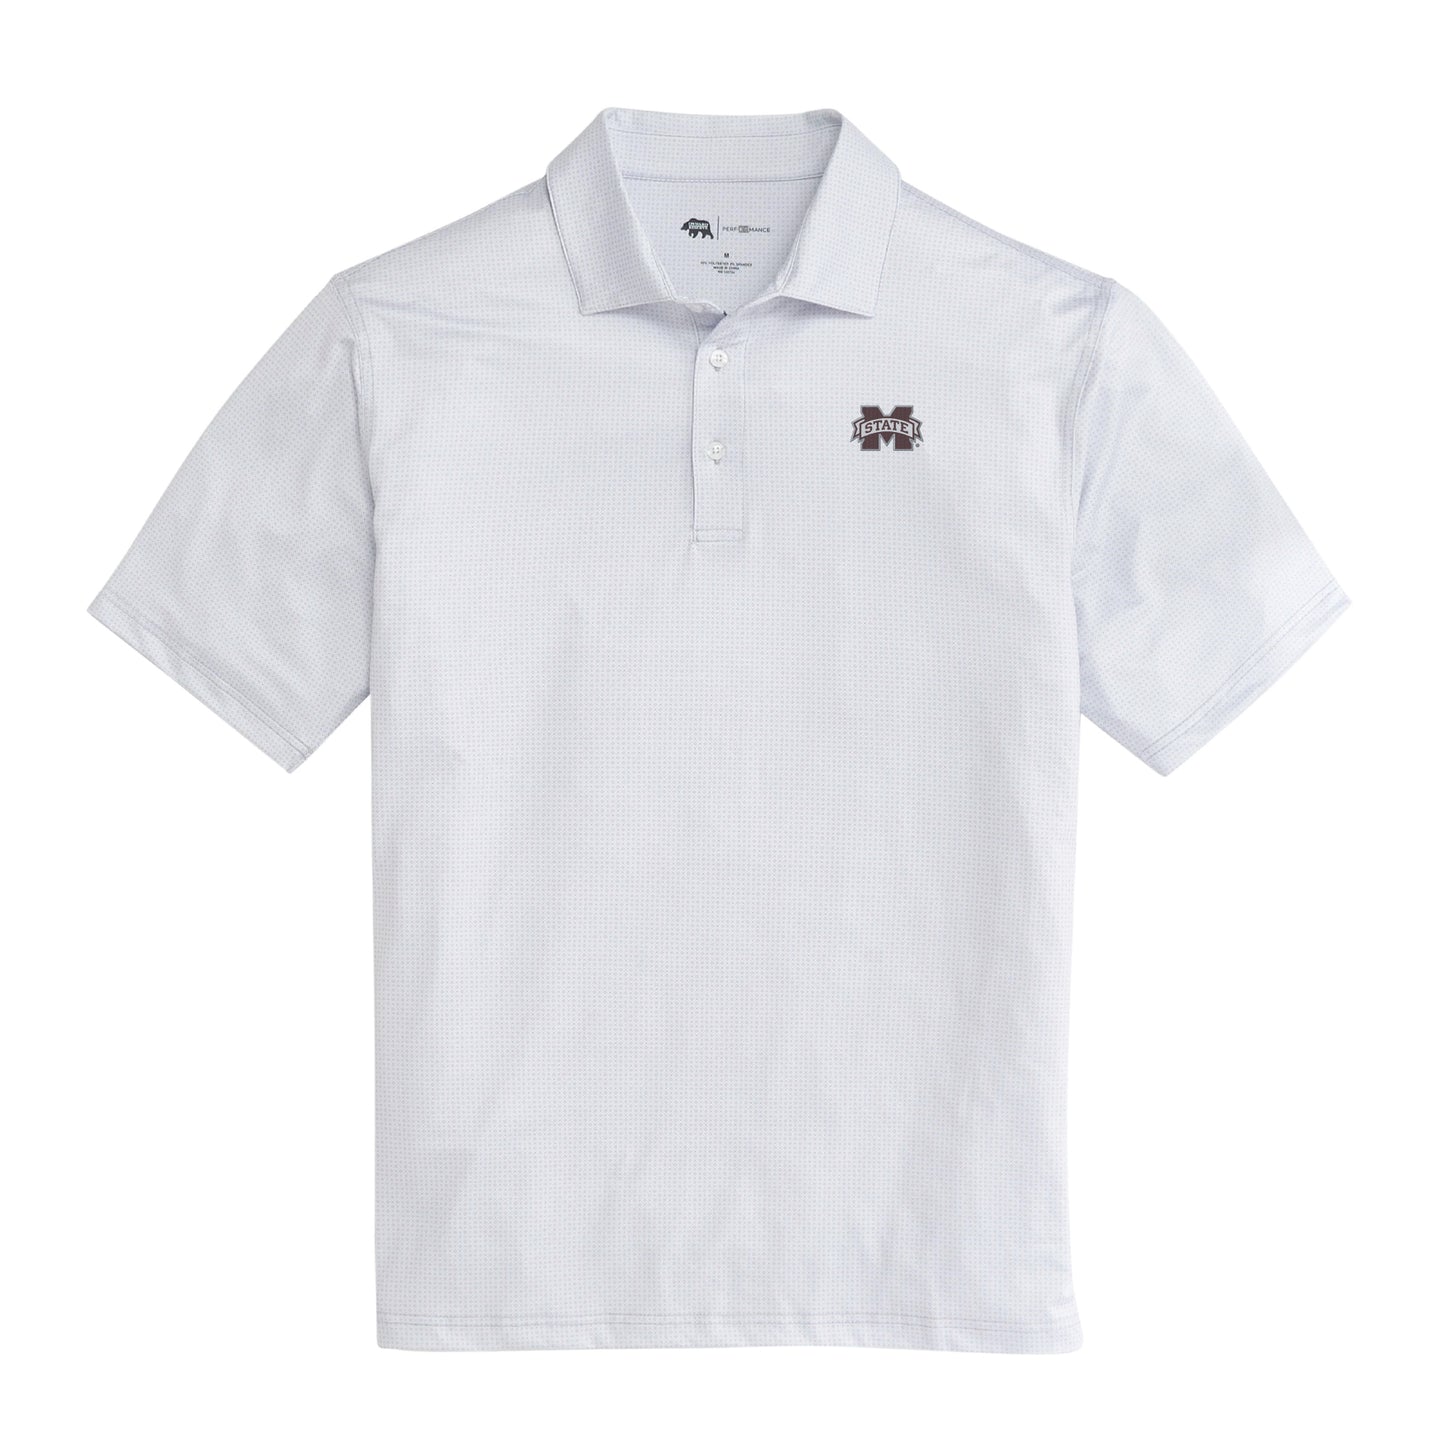 Mississippi State Range Printed Performance Polo